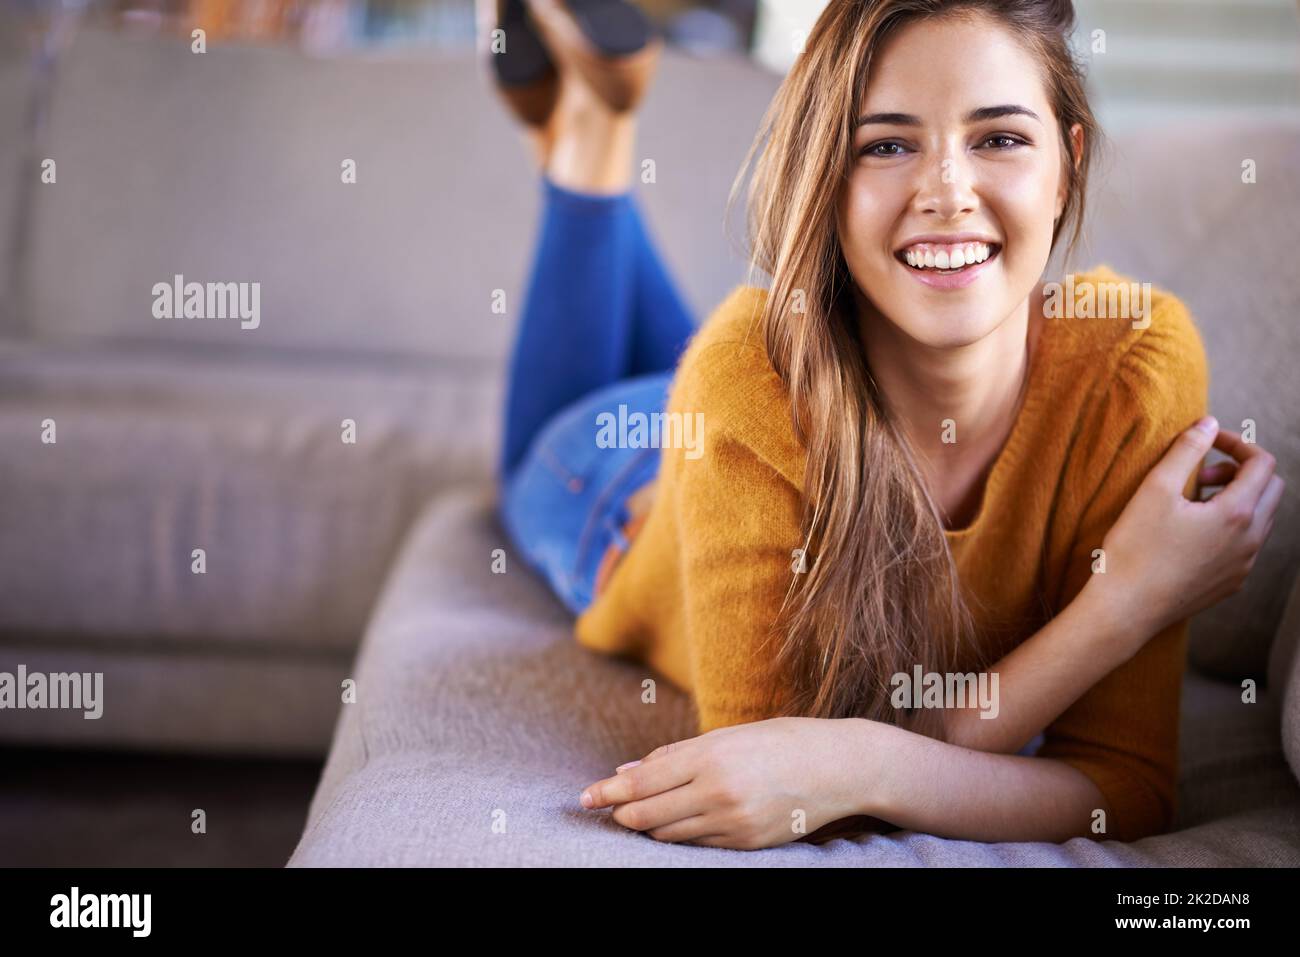 Nowhere more relaxing than on the sofa.... Portrait of a beautiful young woman lying on a sofa at home. Stock Photo